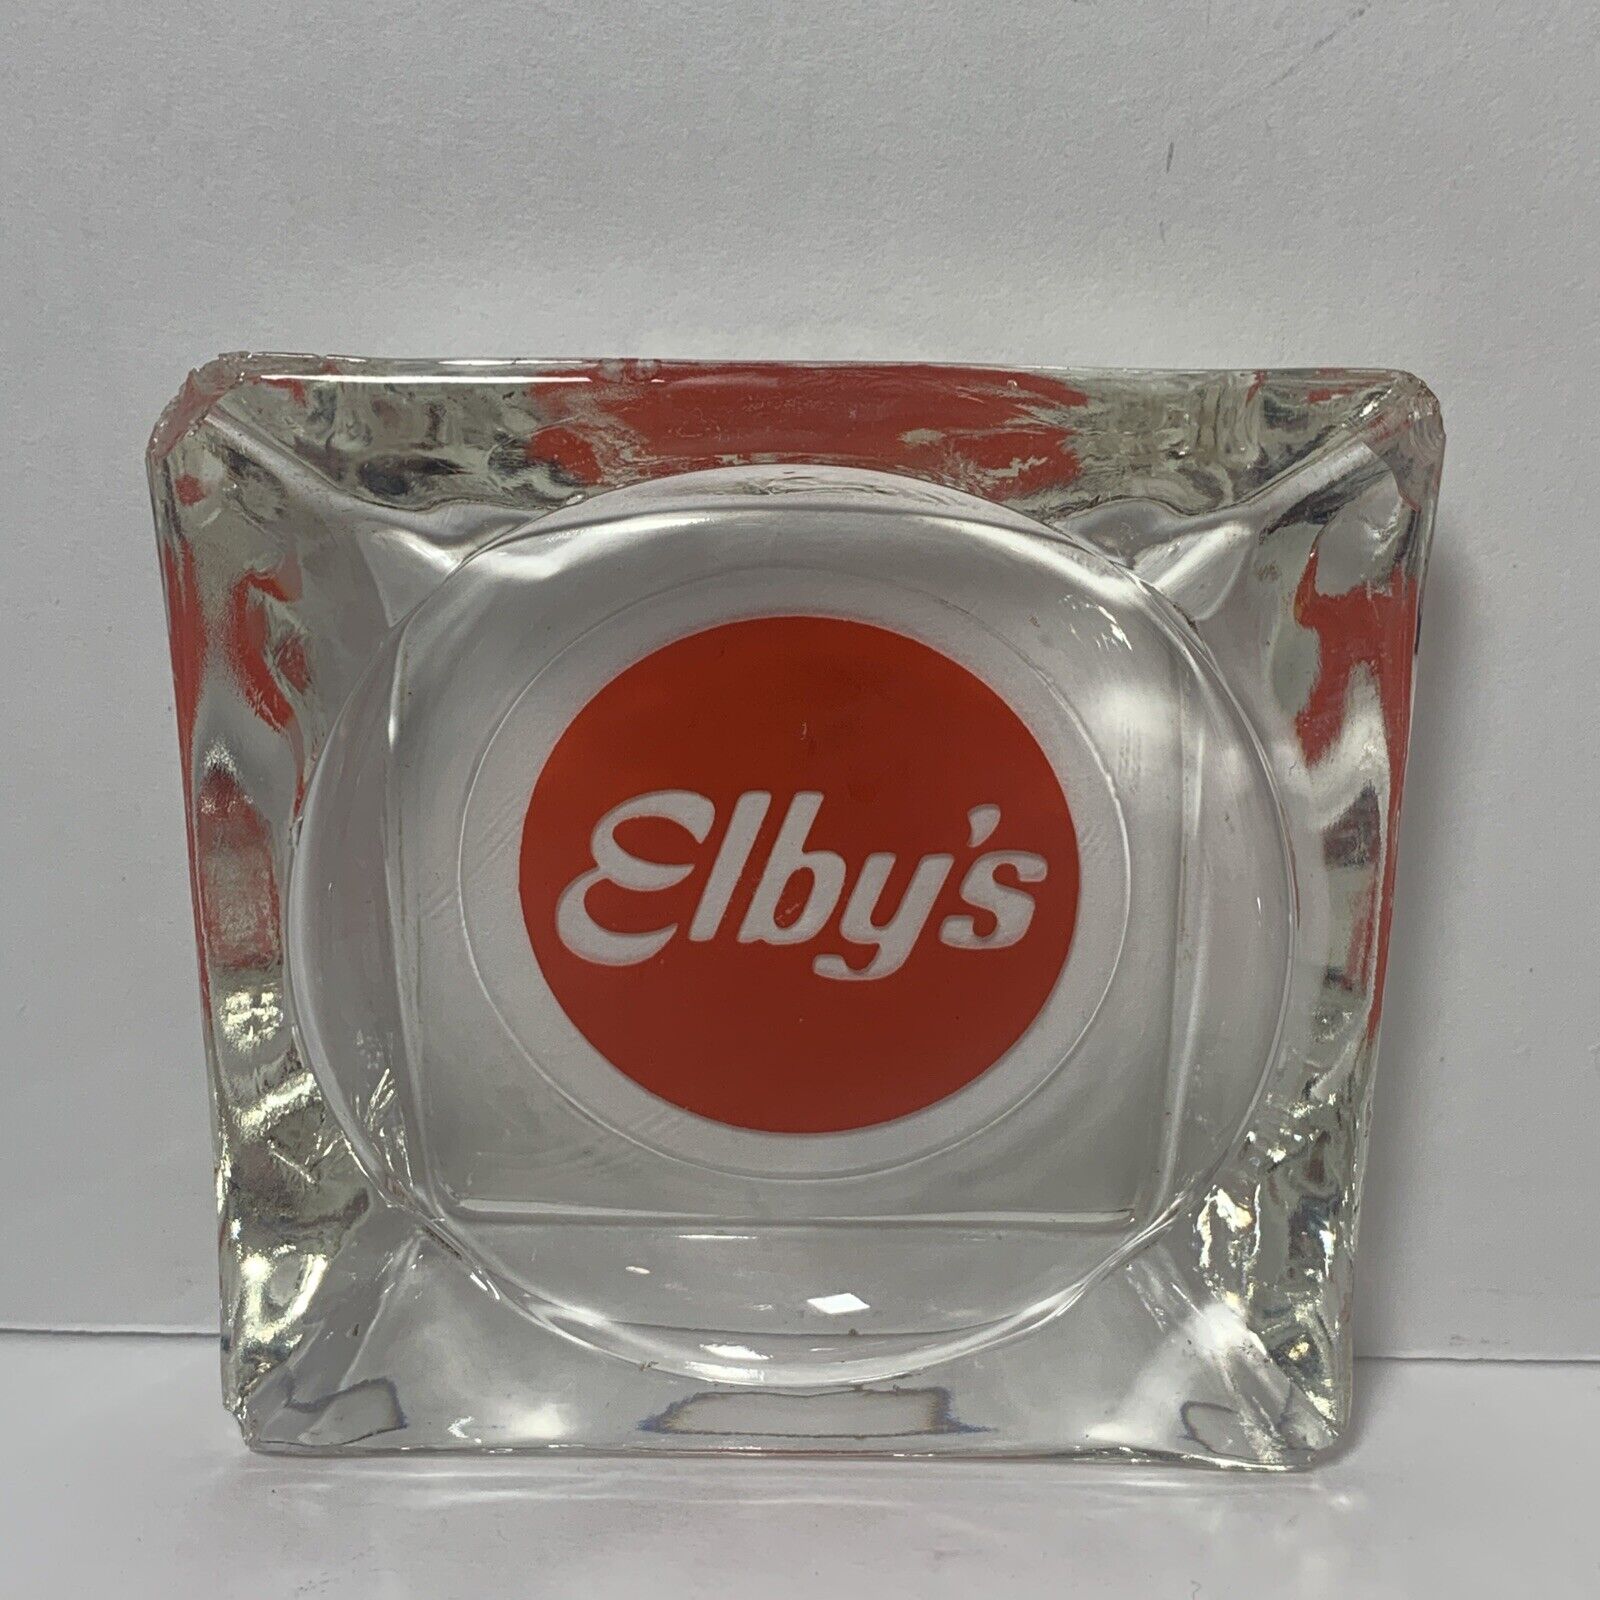 Vintage Glass Ashtray Elby's Restaurant Clear with Orange